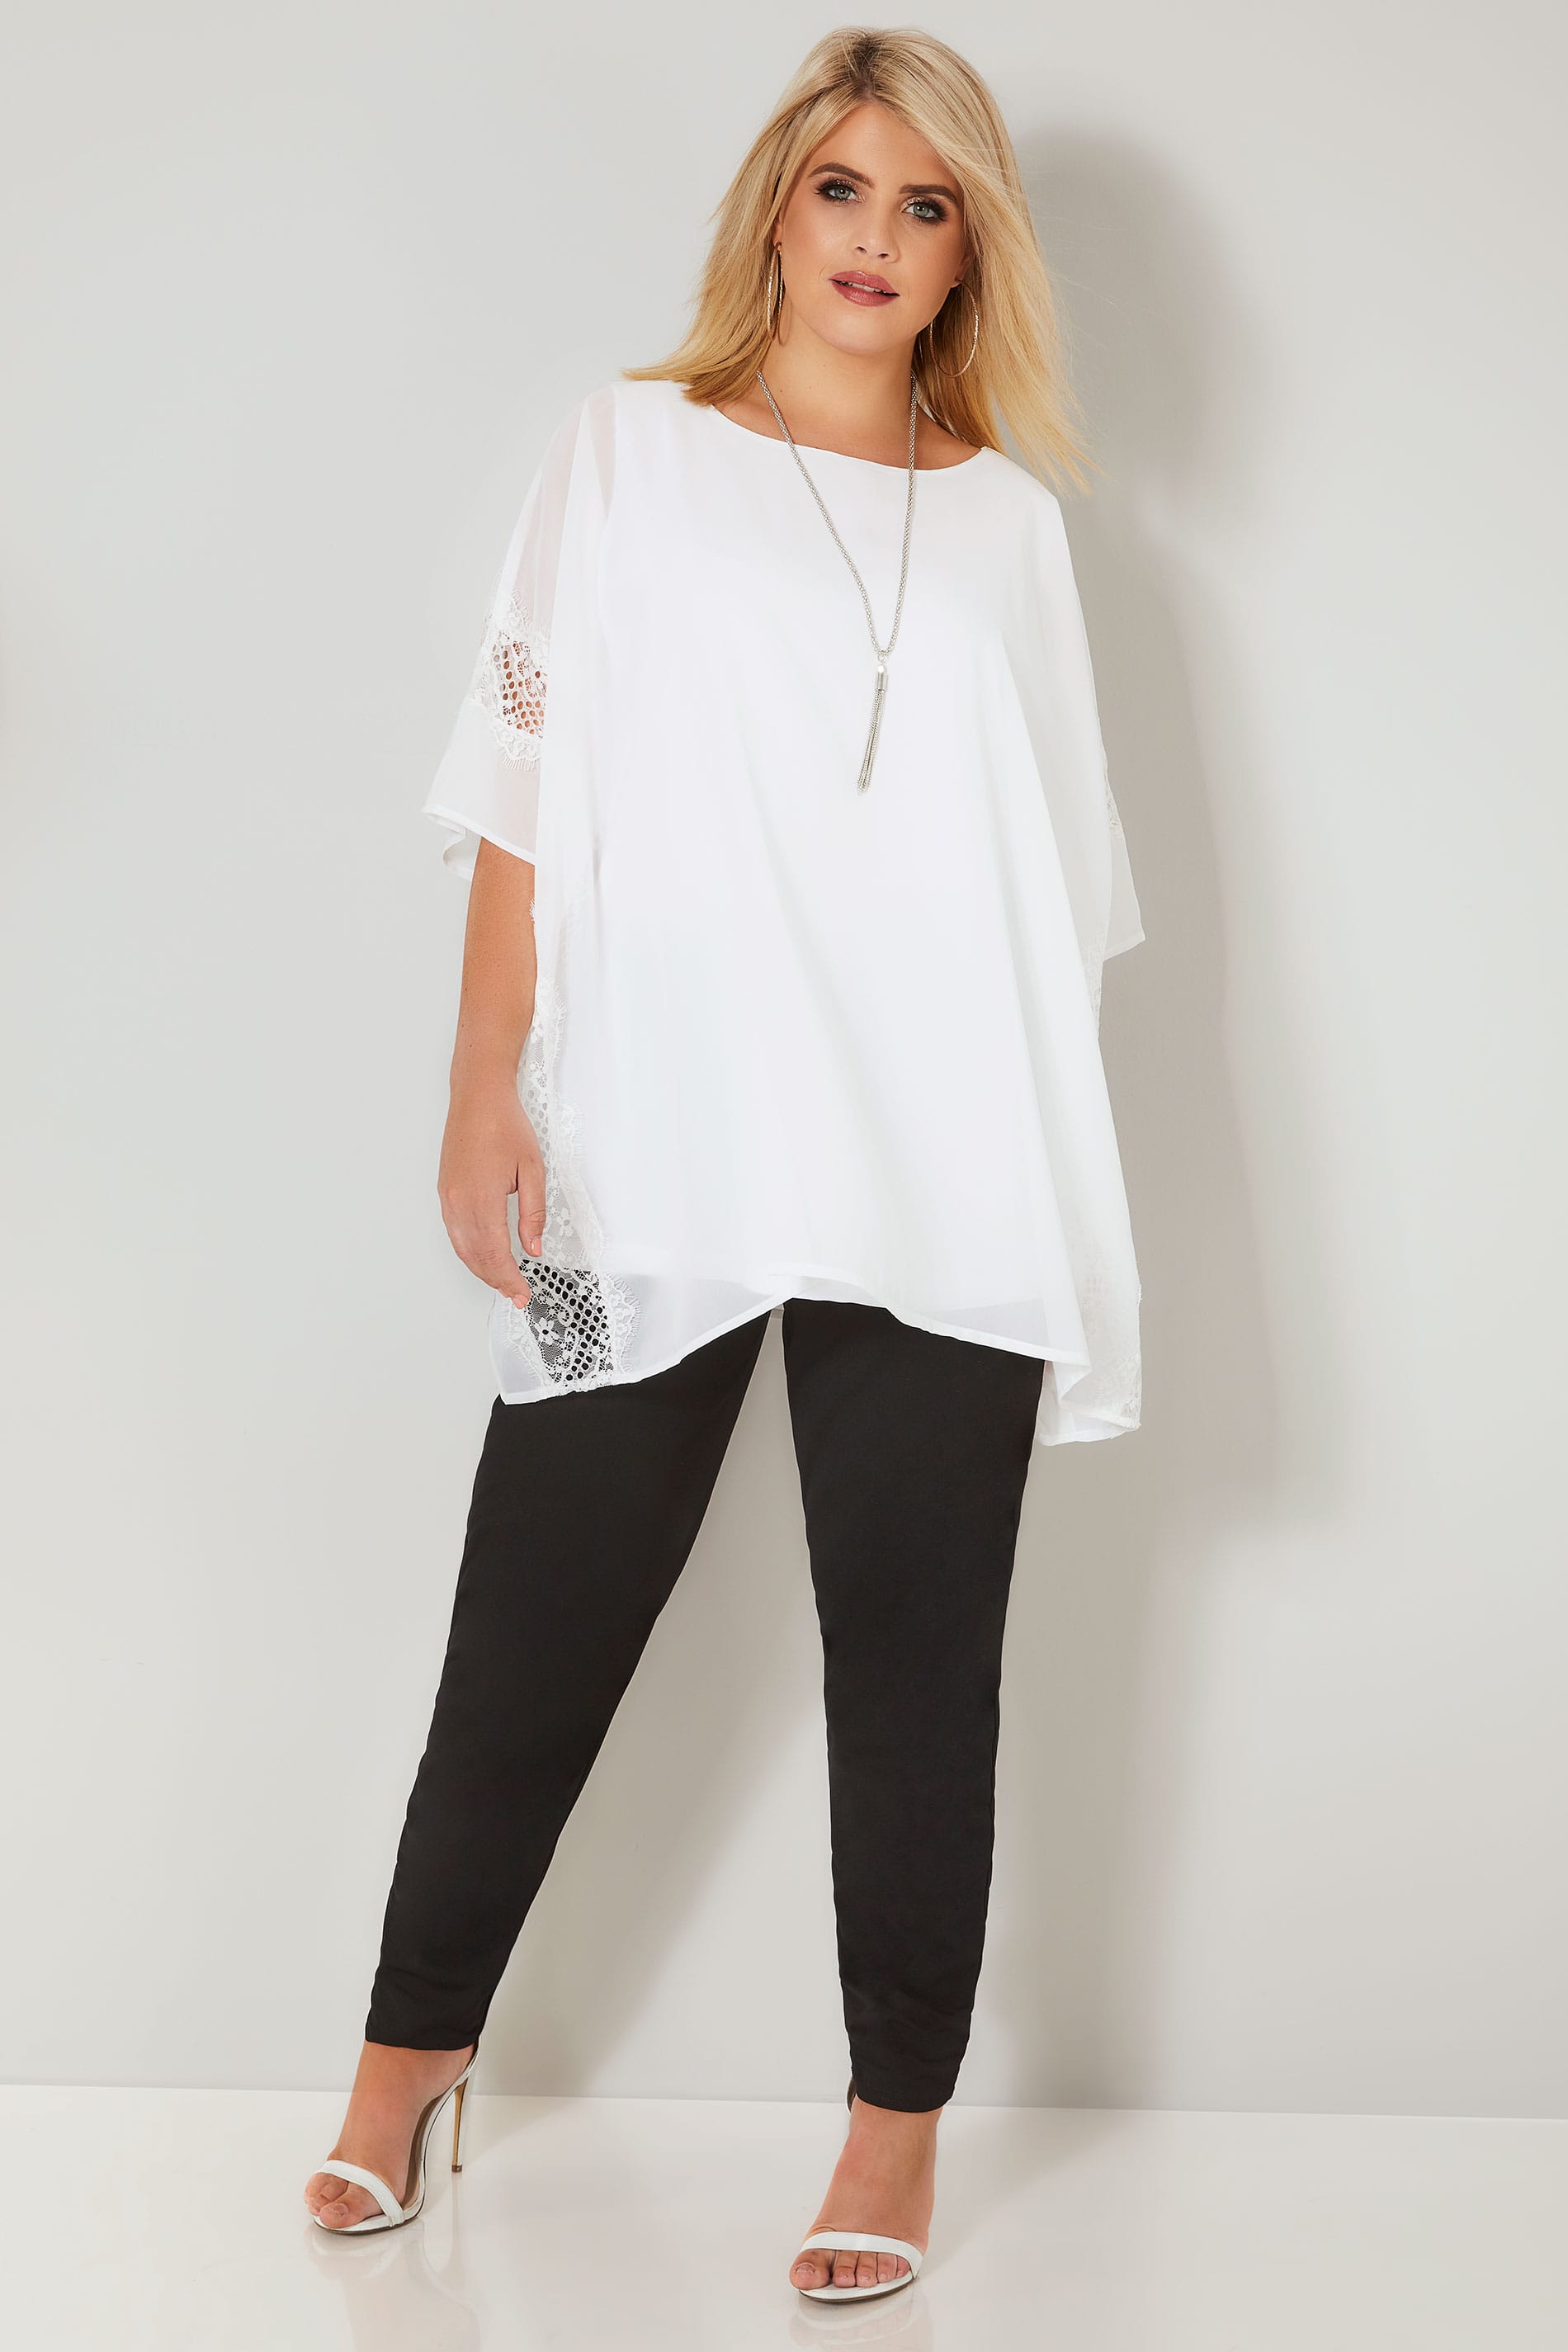 YOURS LONDON White Chiffon Cape Top, Plus size 16 to 32